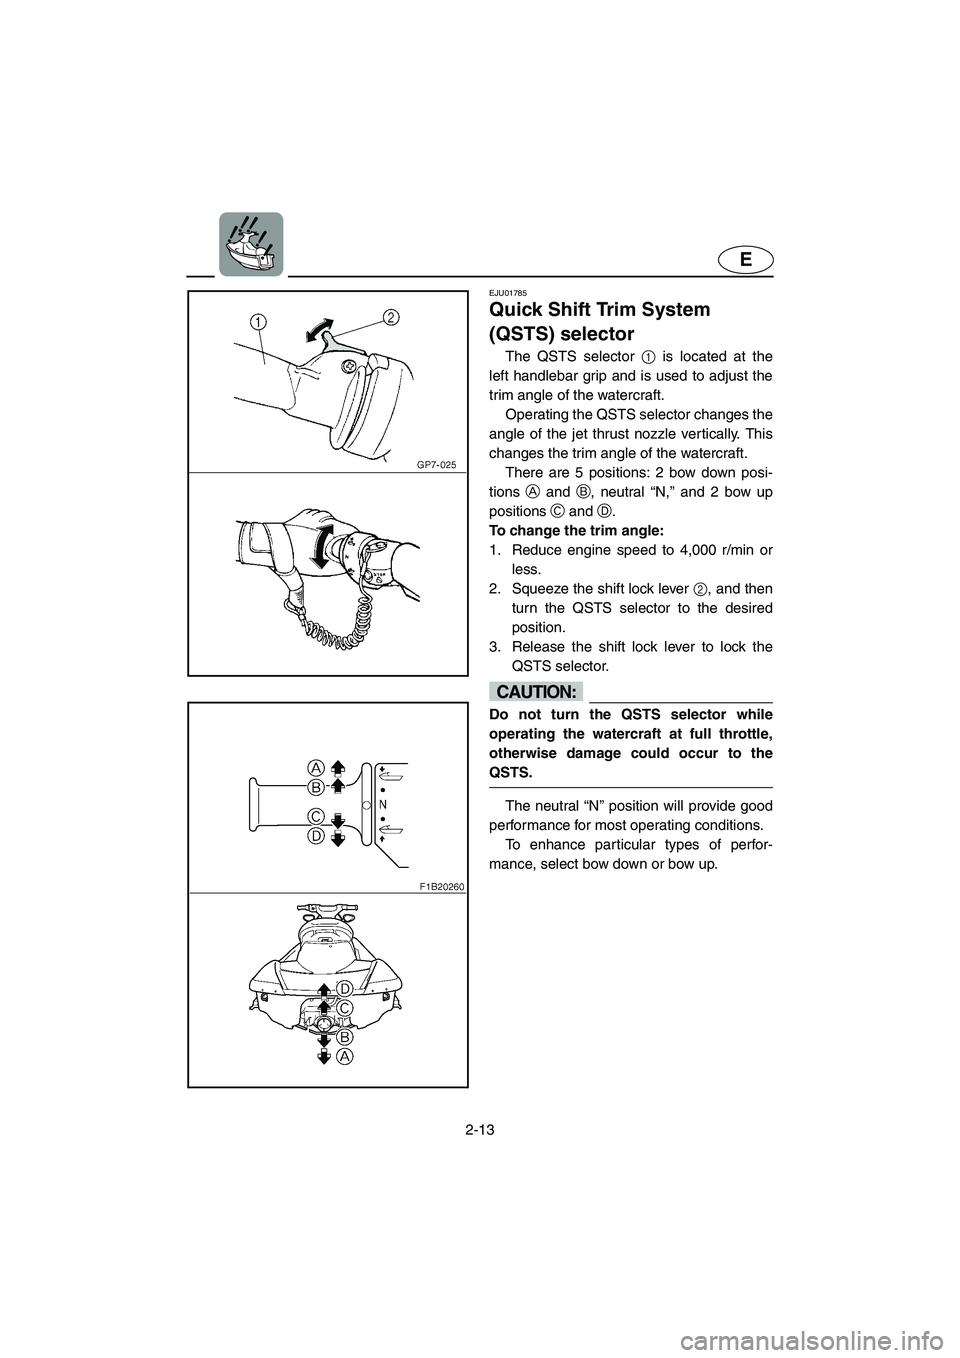 YAMAHA FX CRUISER 2006 Service Manual 2-13
E
EJU01785
Quick Shift Trim System 
(QSTS) selector  
The QSTS selector 1 is located at the
left handlebar grip and is used to adjust the
trim angle of the watercraft. 
Operating the QSTS selecto